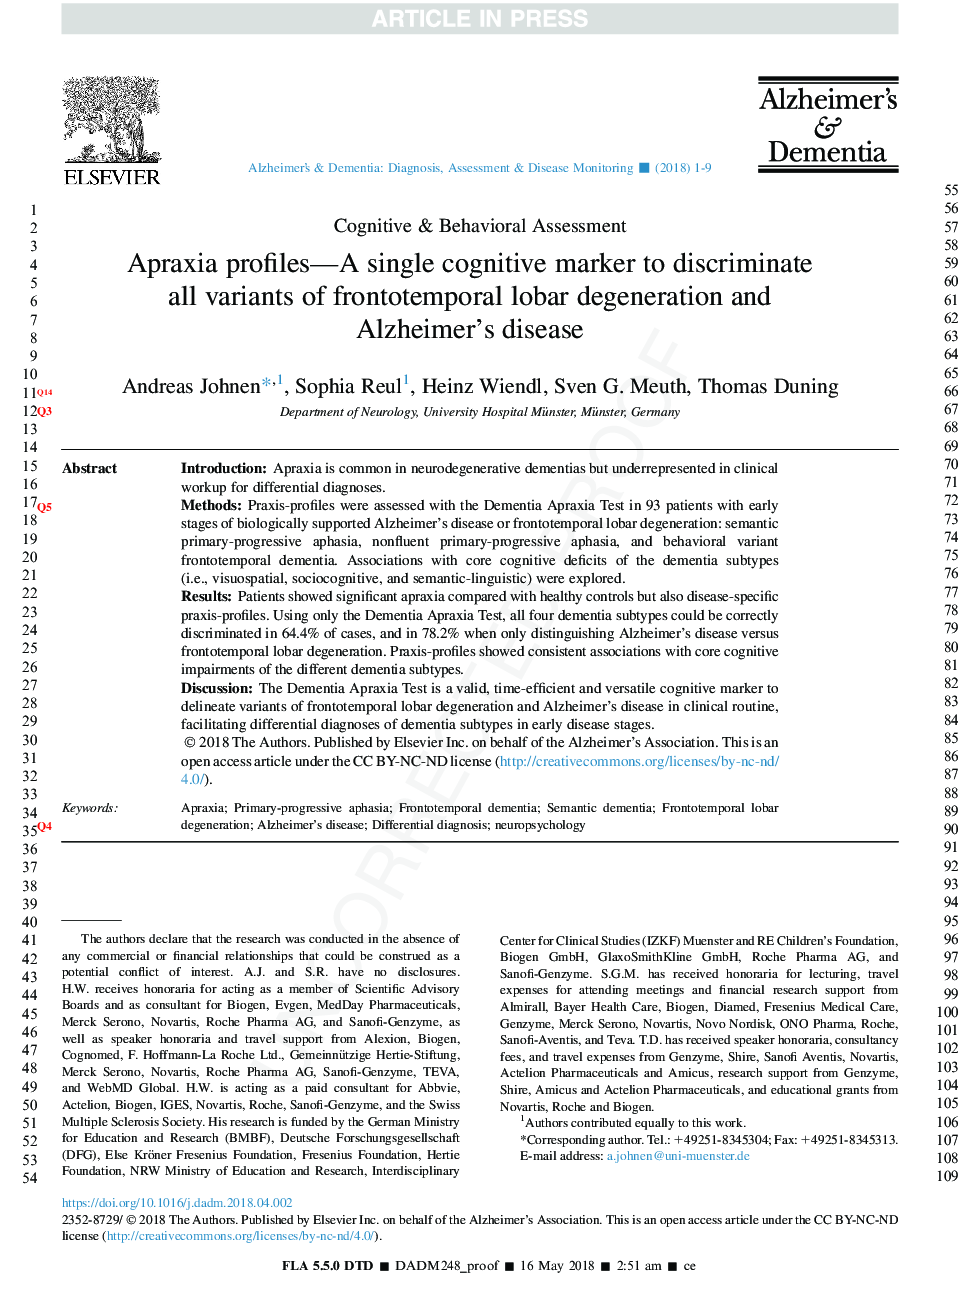 Apraxia profiles-A single cognitive marker to discriminate all variants of frontotemporal lobar degeneration and Alzheimer's disease